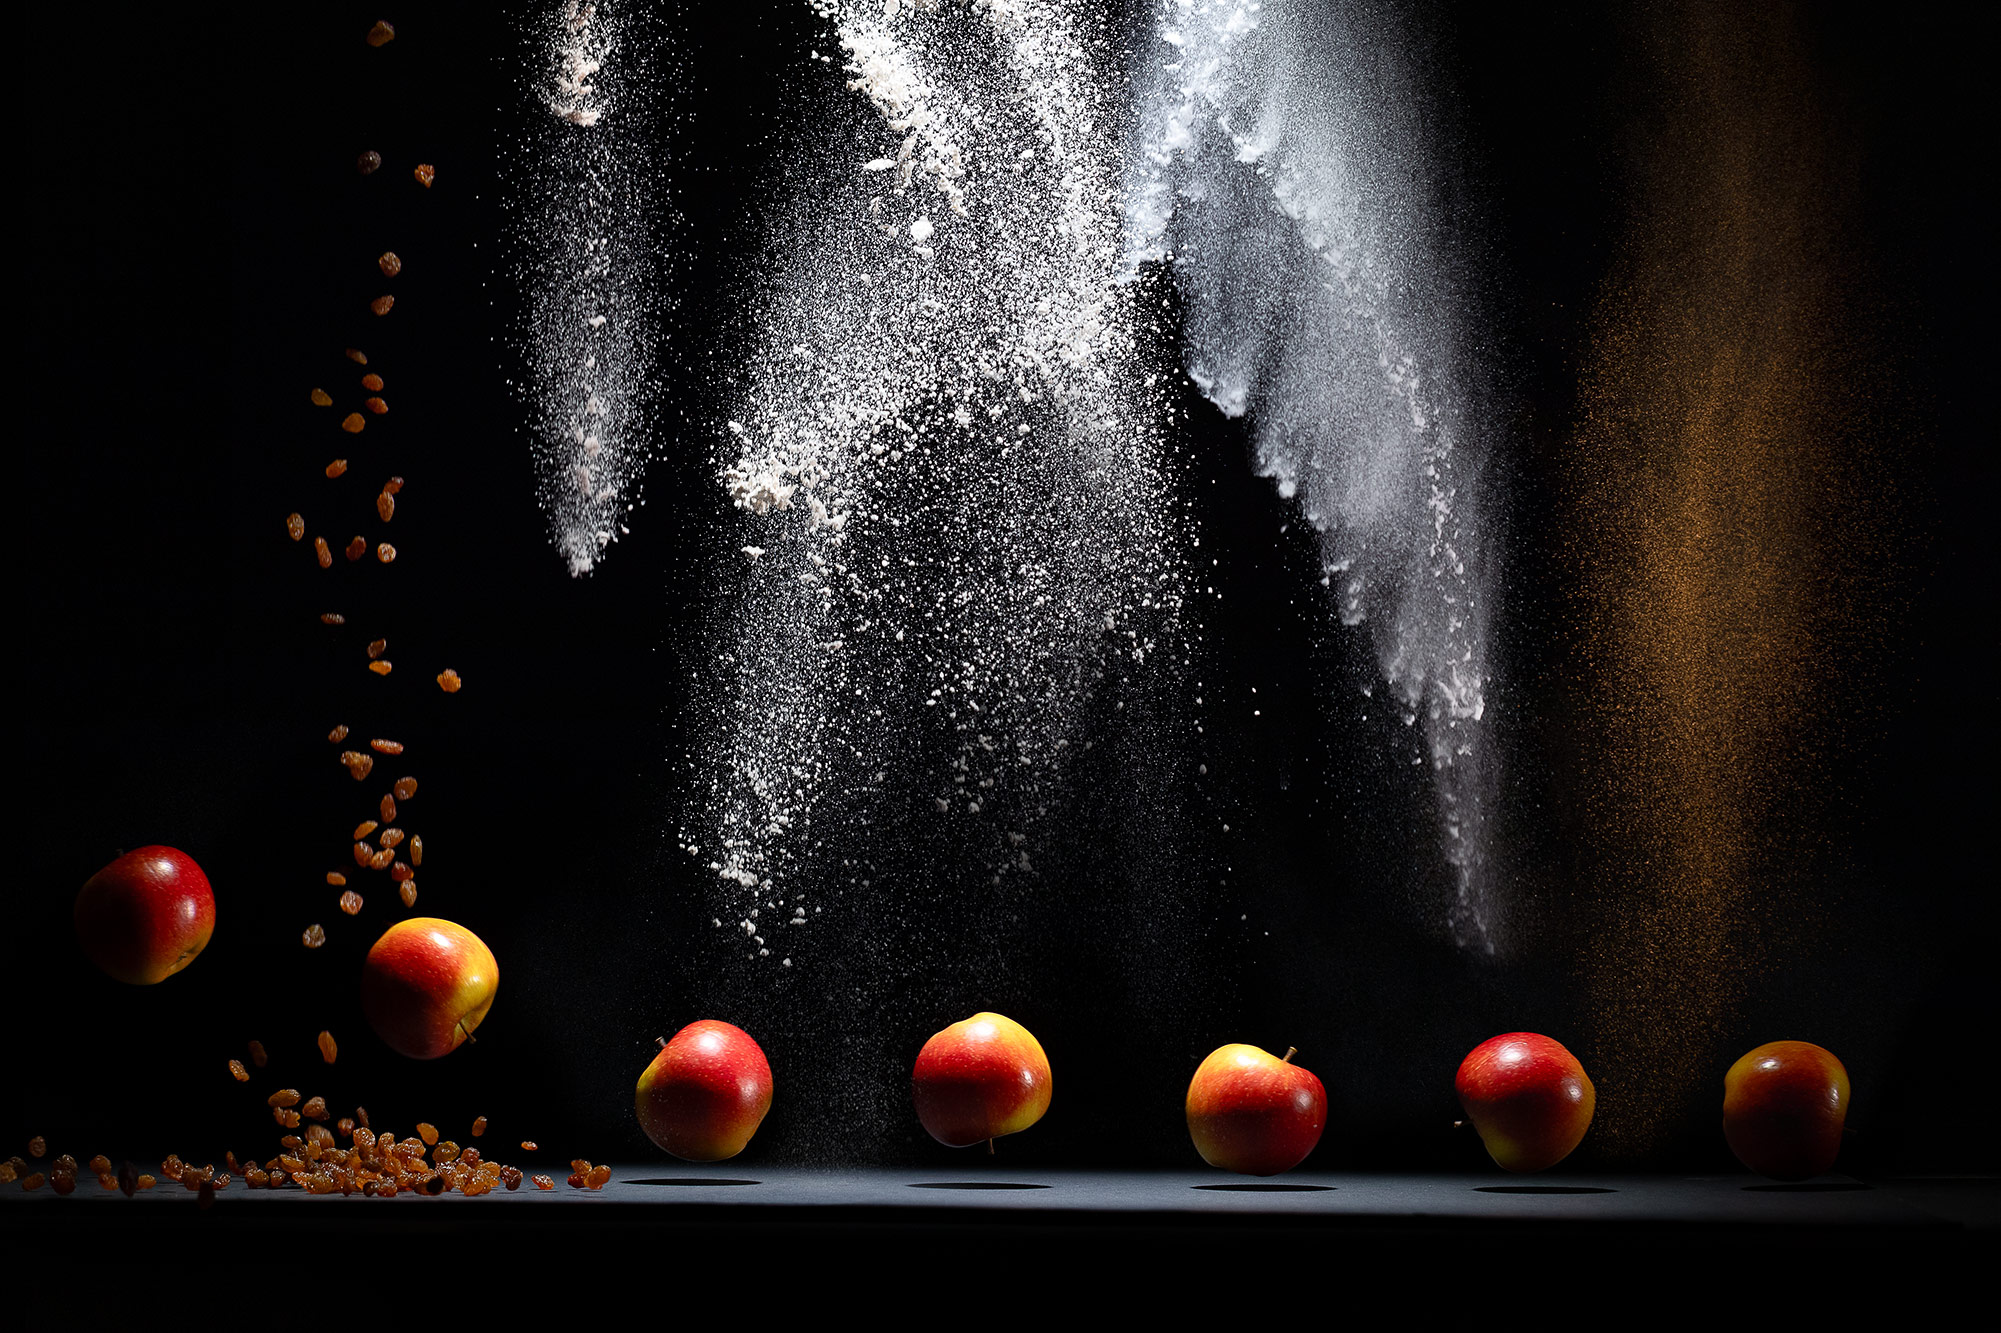 Ingredients for apple pancakes recipe. The image shows an apple running across a black table with black backdrop. Raisins, salt, flour, baking soda and cinnamon powder are falling from above.